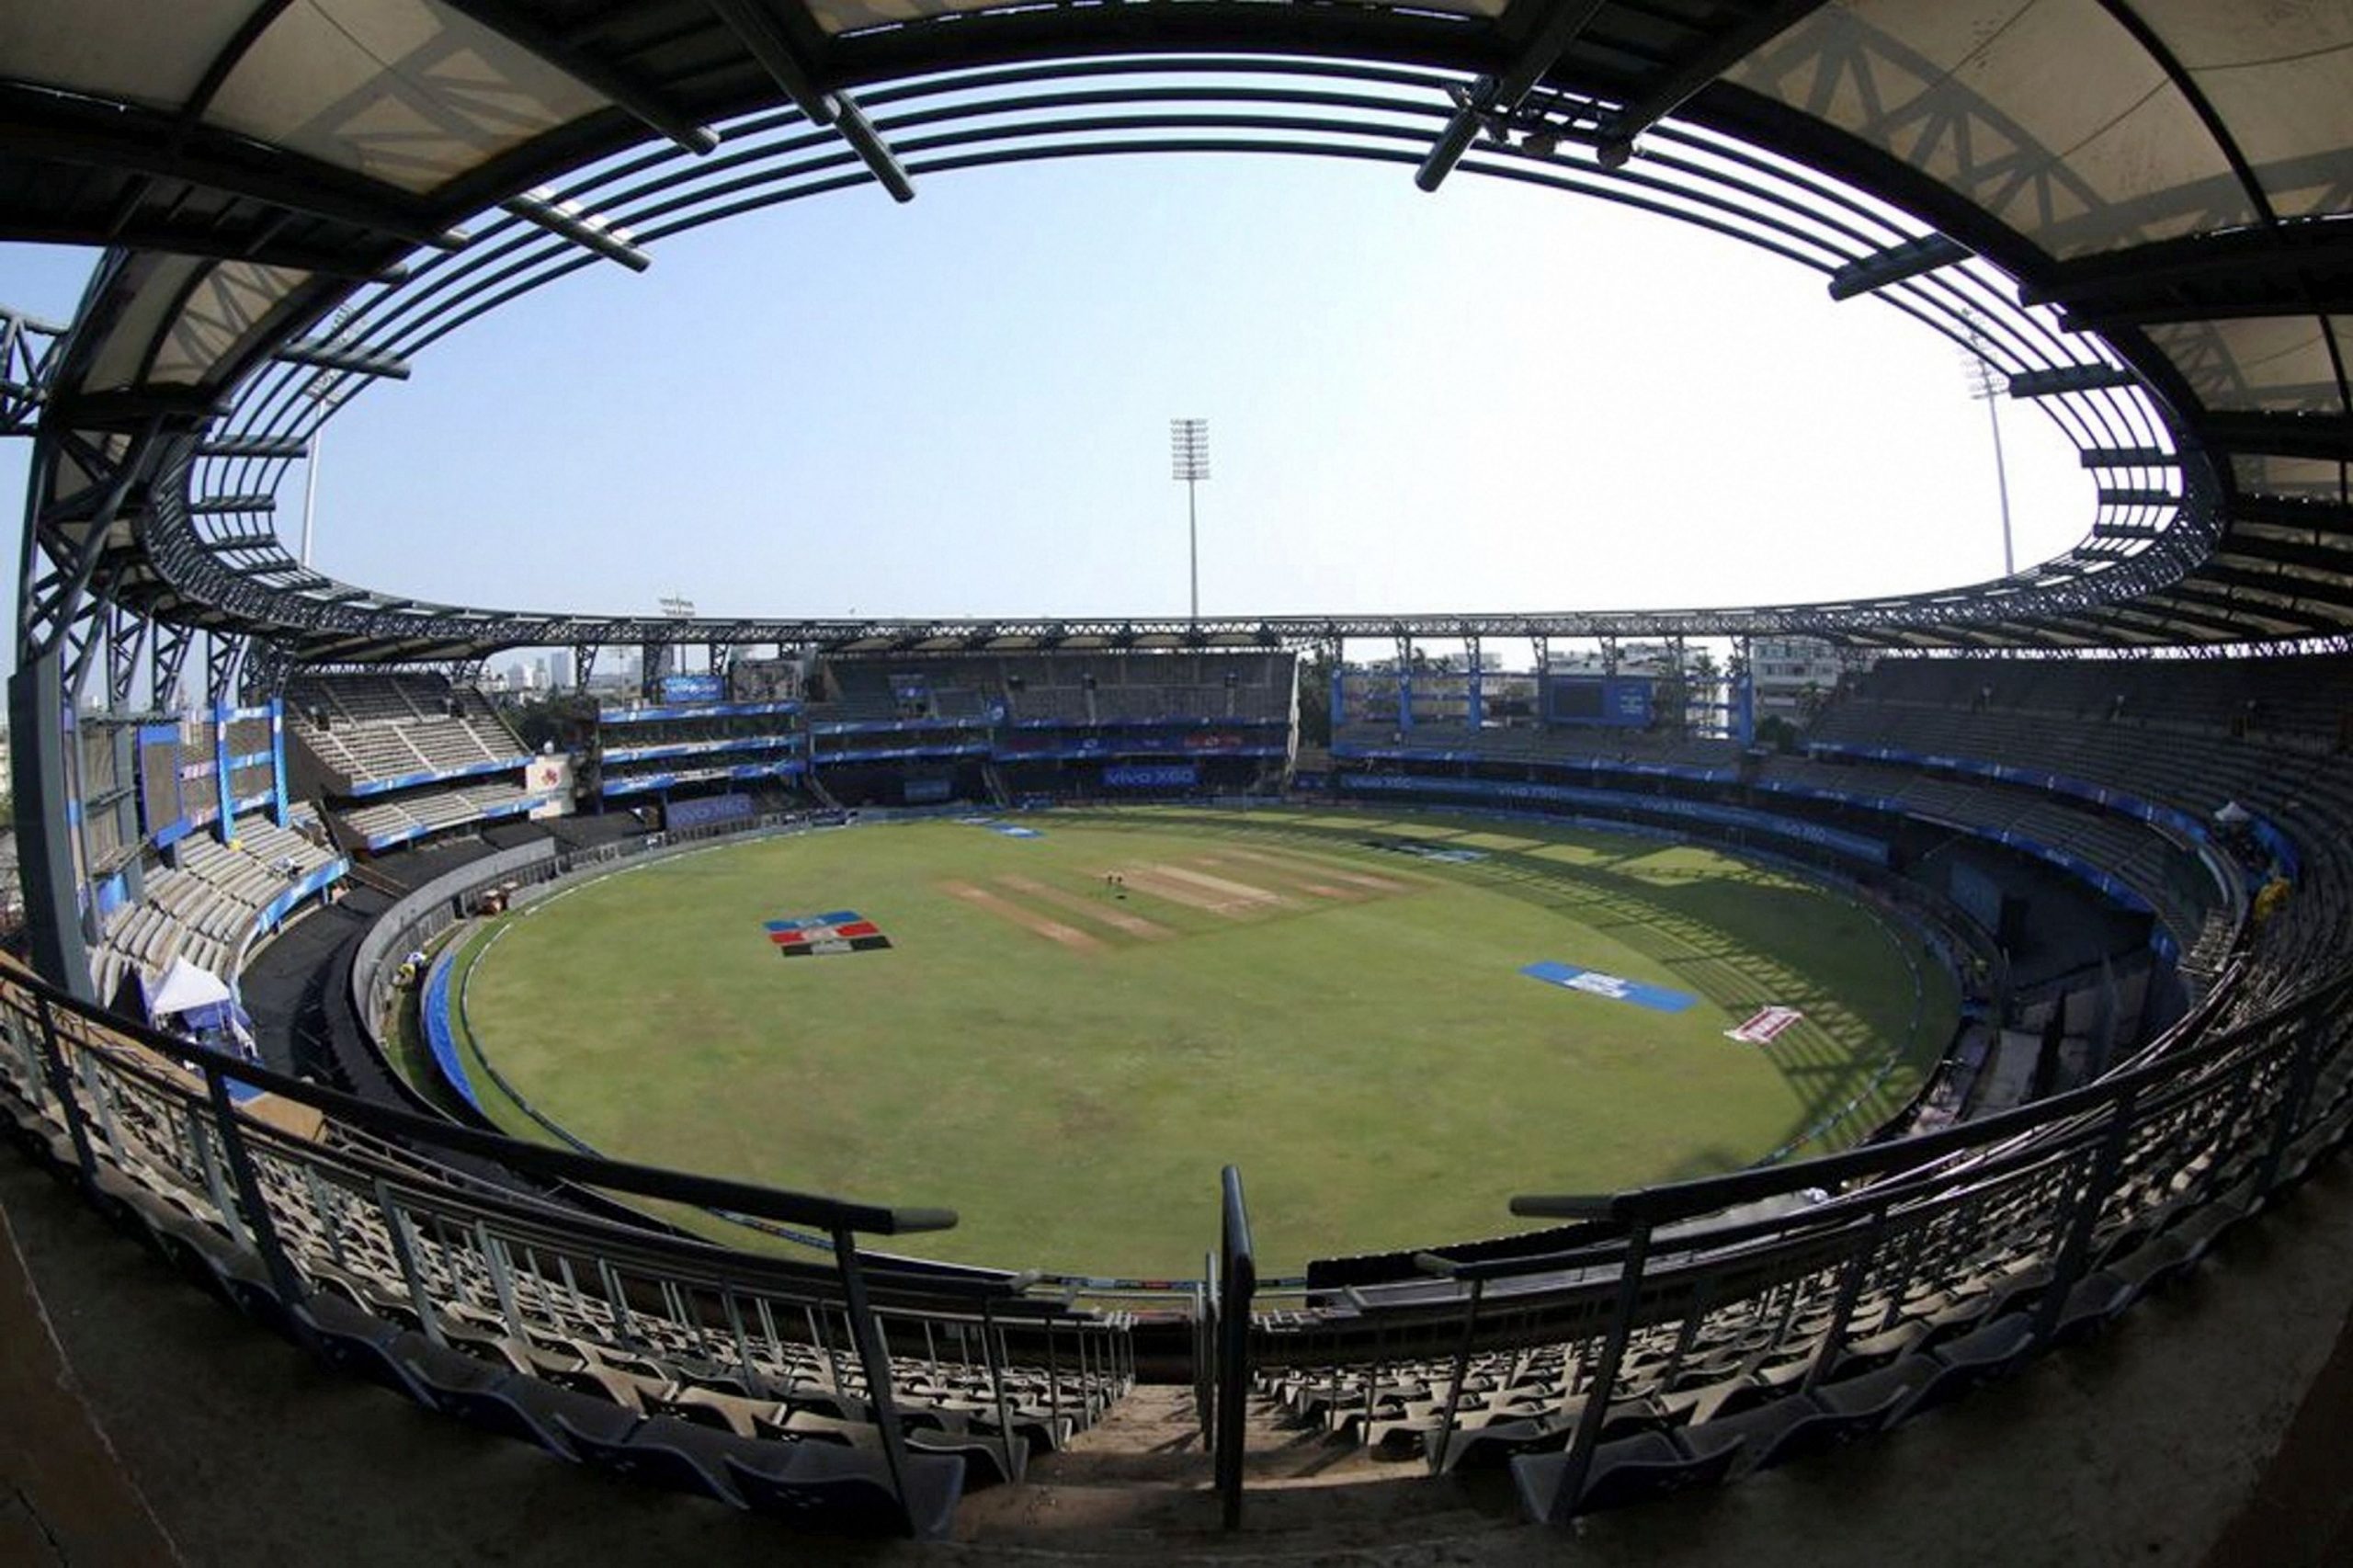 Fear factor at IPL: Early exits amid COVID-19 surge; BCCI says league will go on